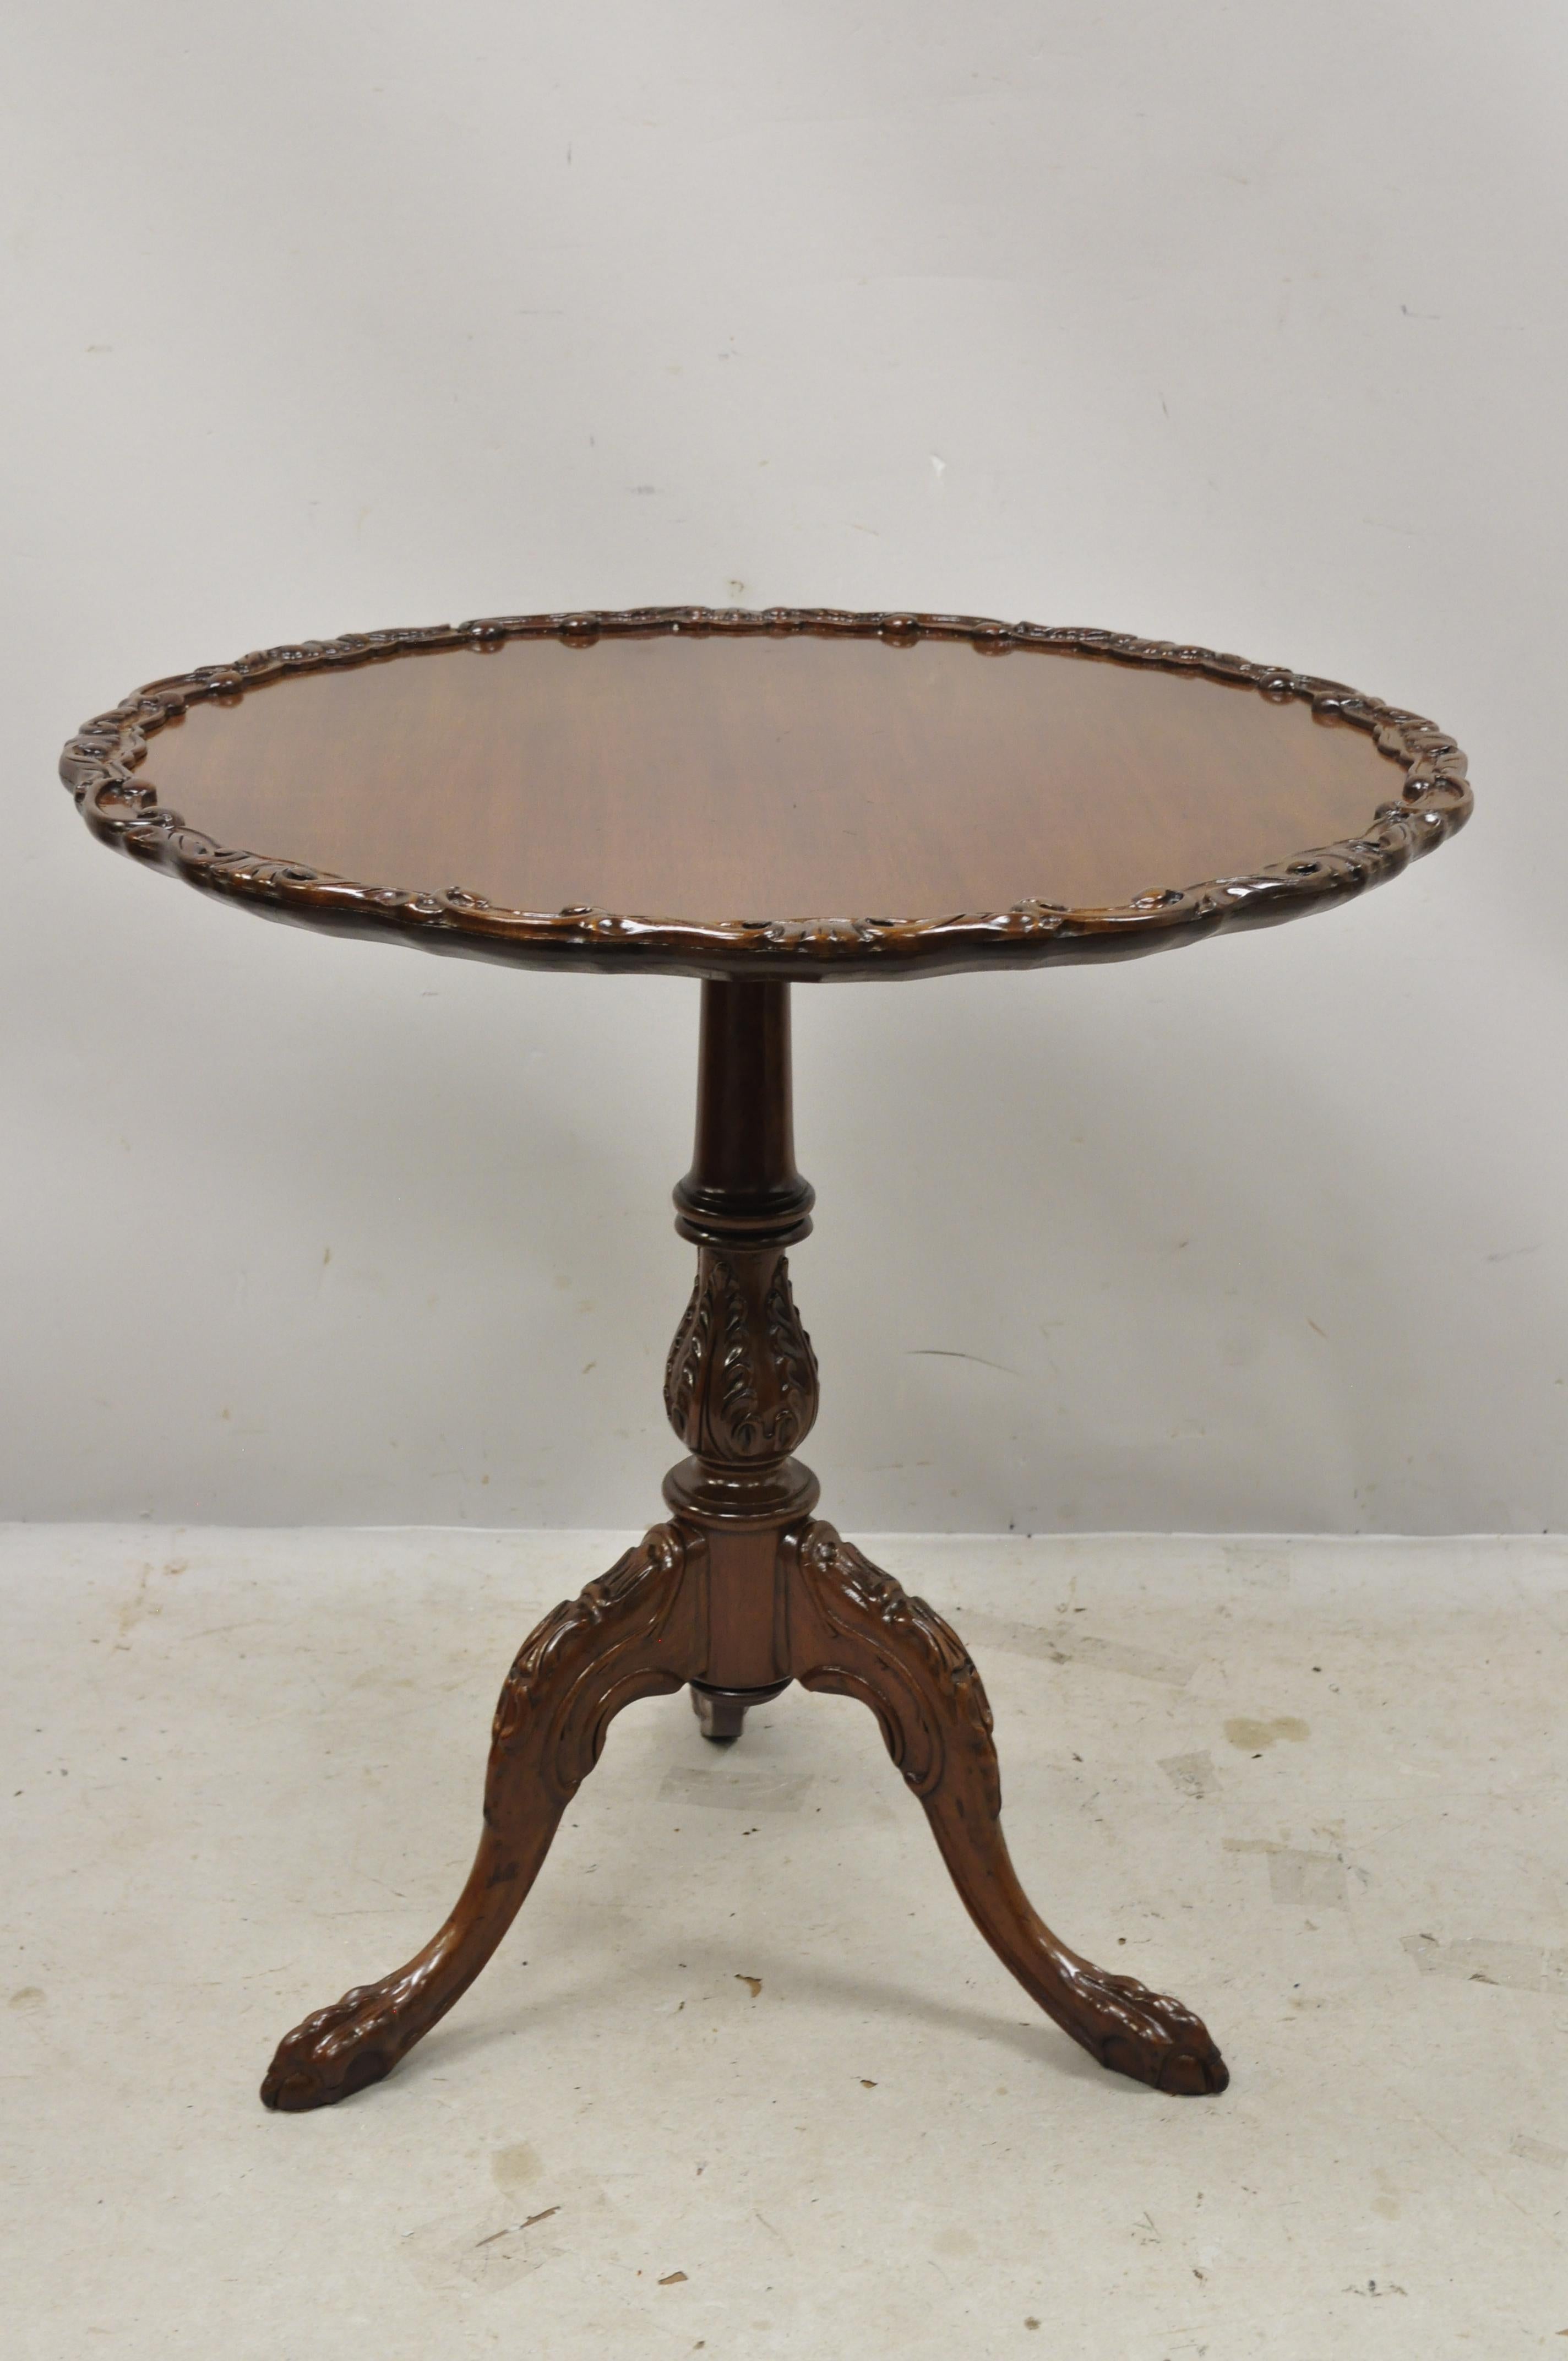 Vintage English Georgian Chippendale mahogany pie crust tilt-top tea table. Item features pie crust carved edge, carved pedestal base, solid wood construction, beautiful wood grain, nicely carved details, carved ball and claw feet,
circa mid-20th